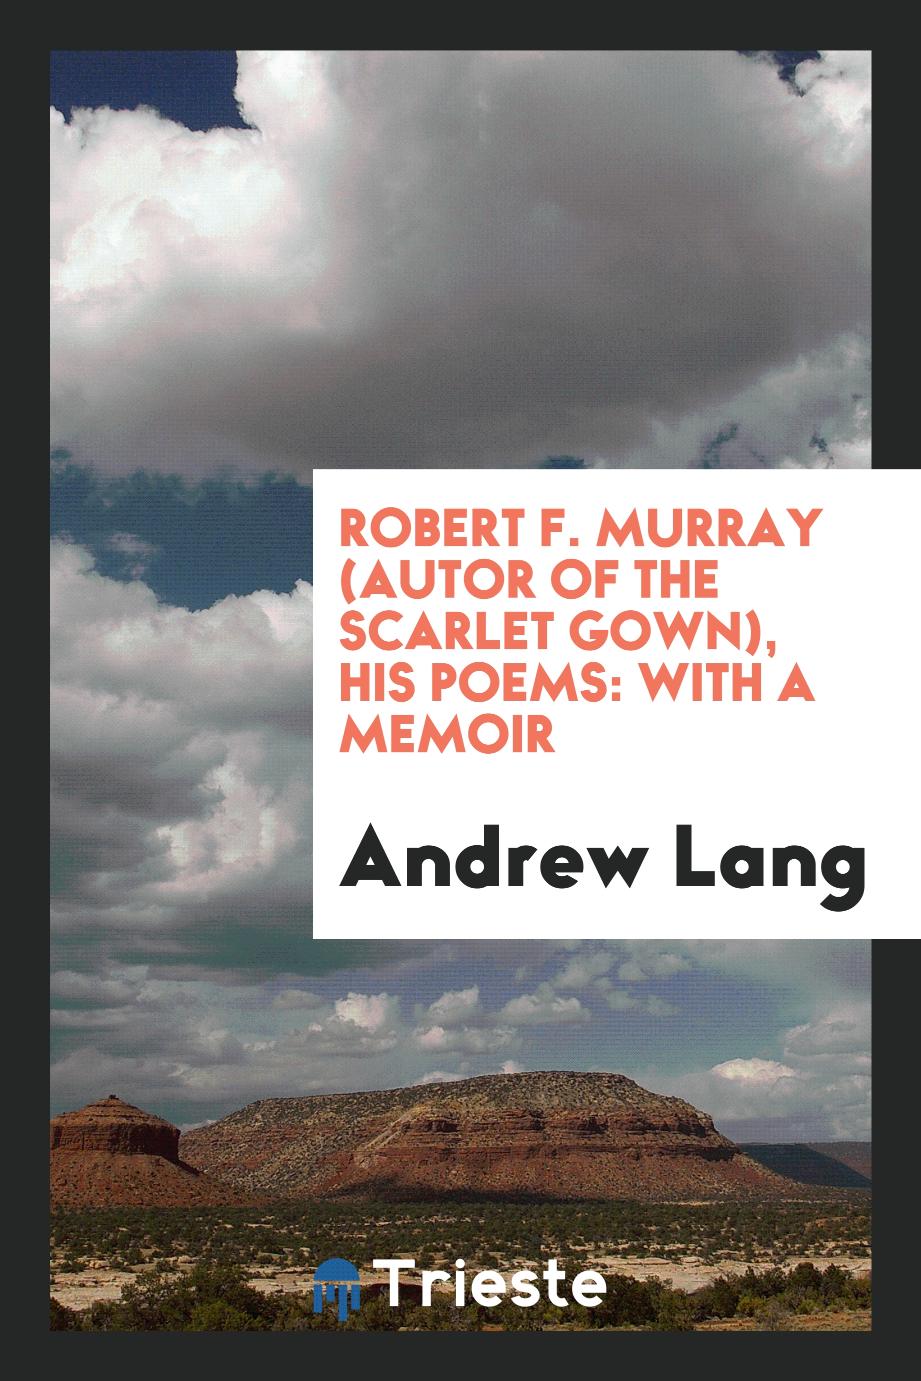 Robert F. Murray (autor of the Scarlet Gown), his poems: with a memoir